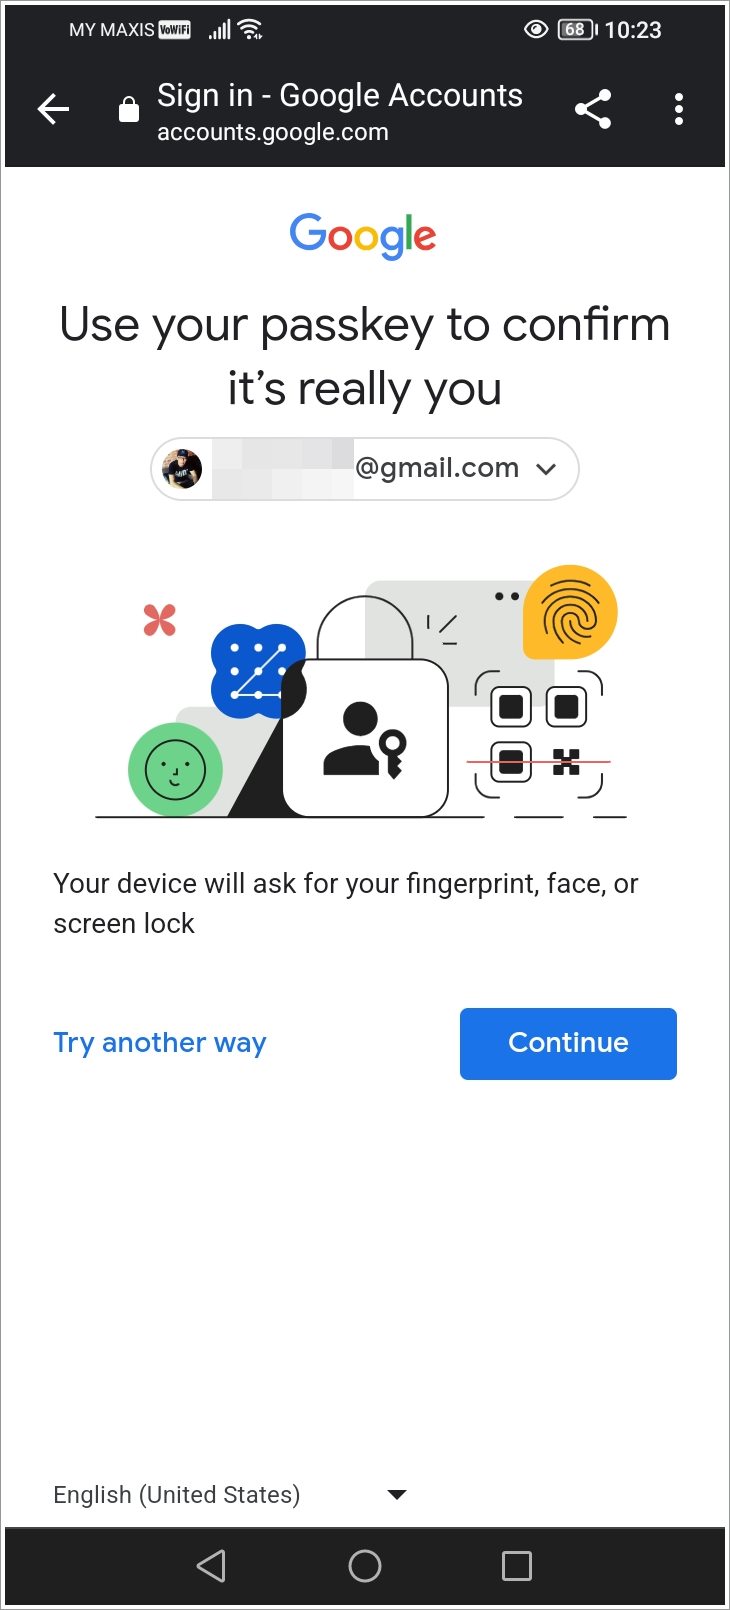 This is a mobile screenshot of the Google Account's 'Use Your Passkey to Confirm It's Really You' page.